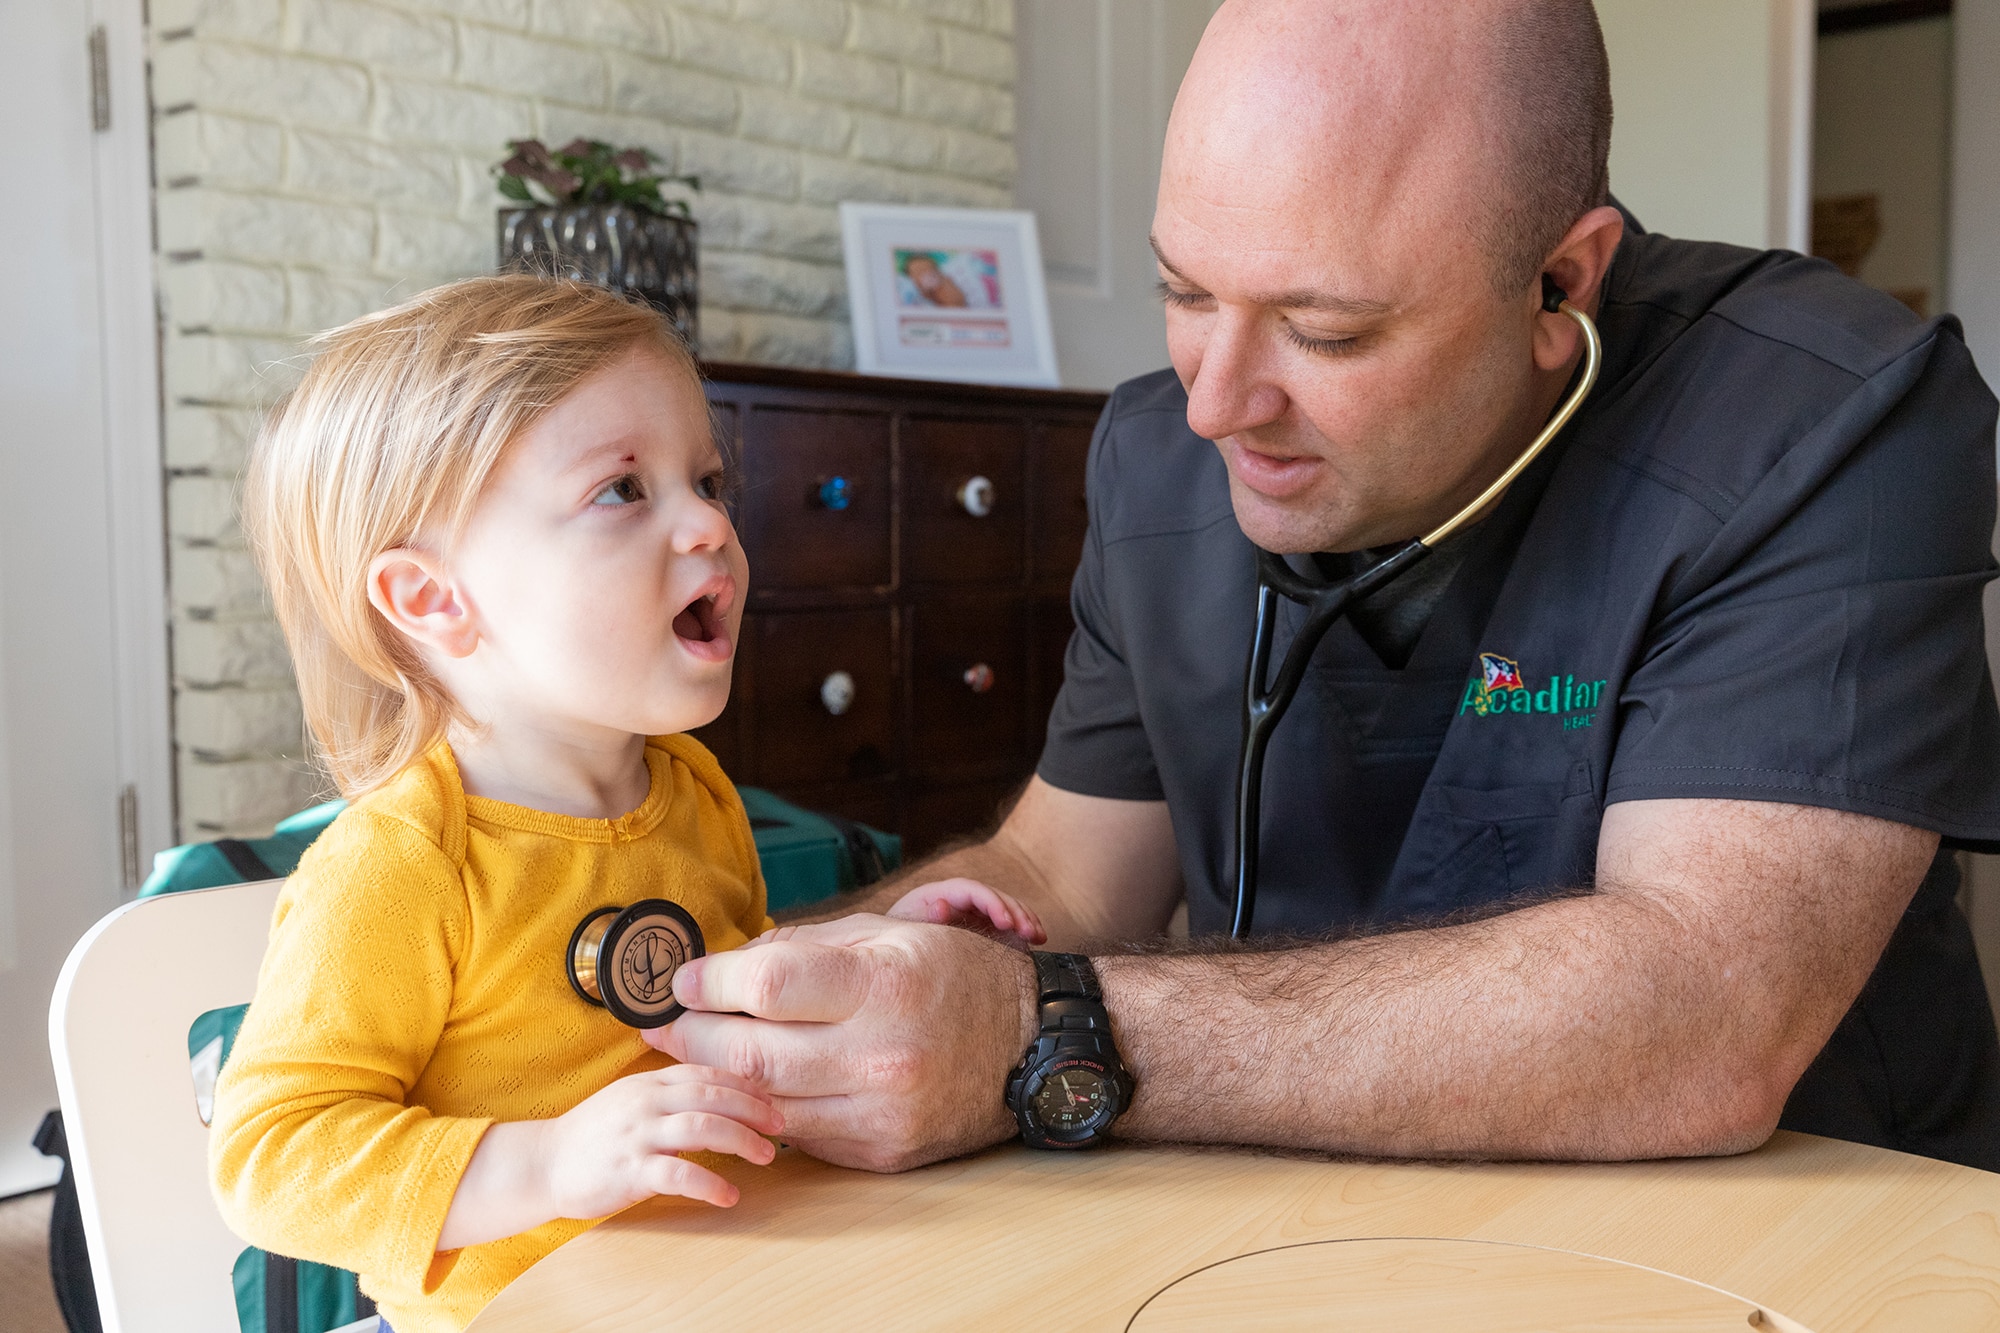 Acadian Health employee examining a child at home